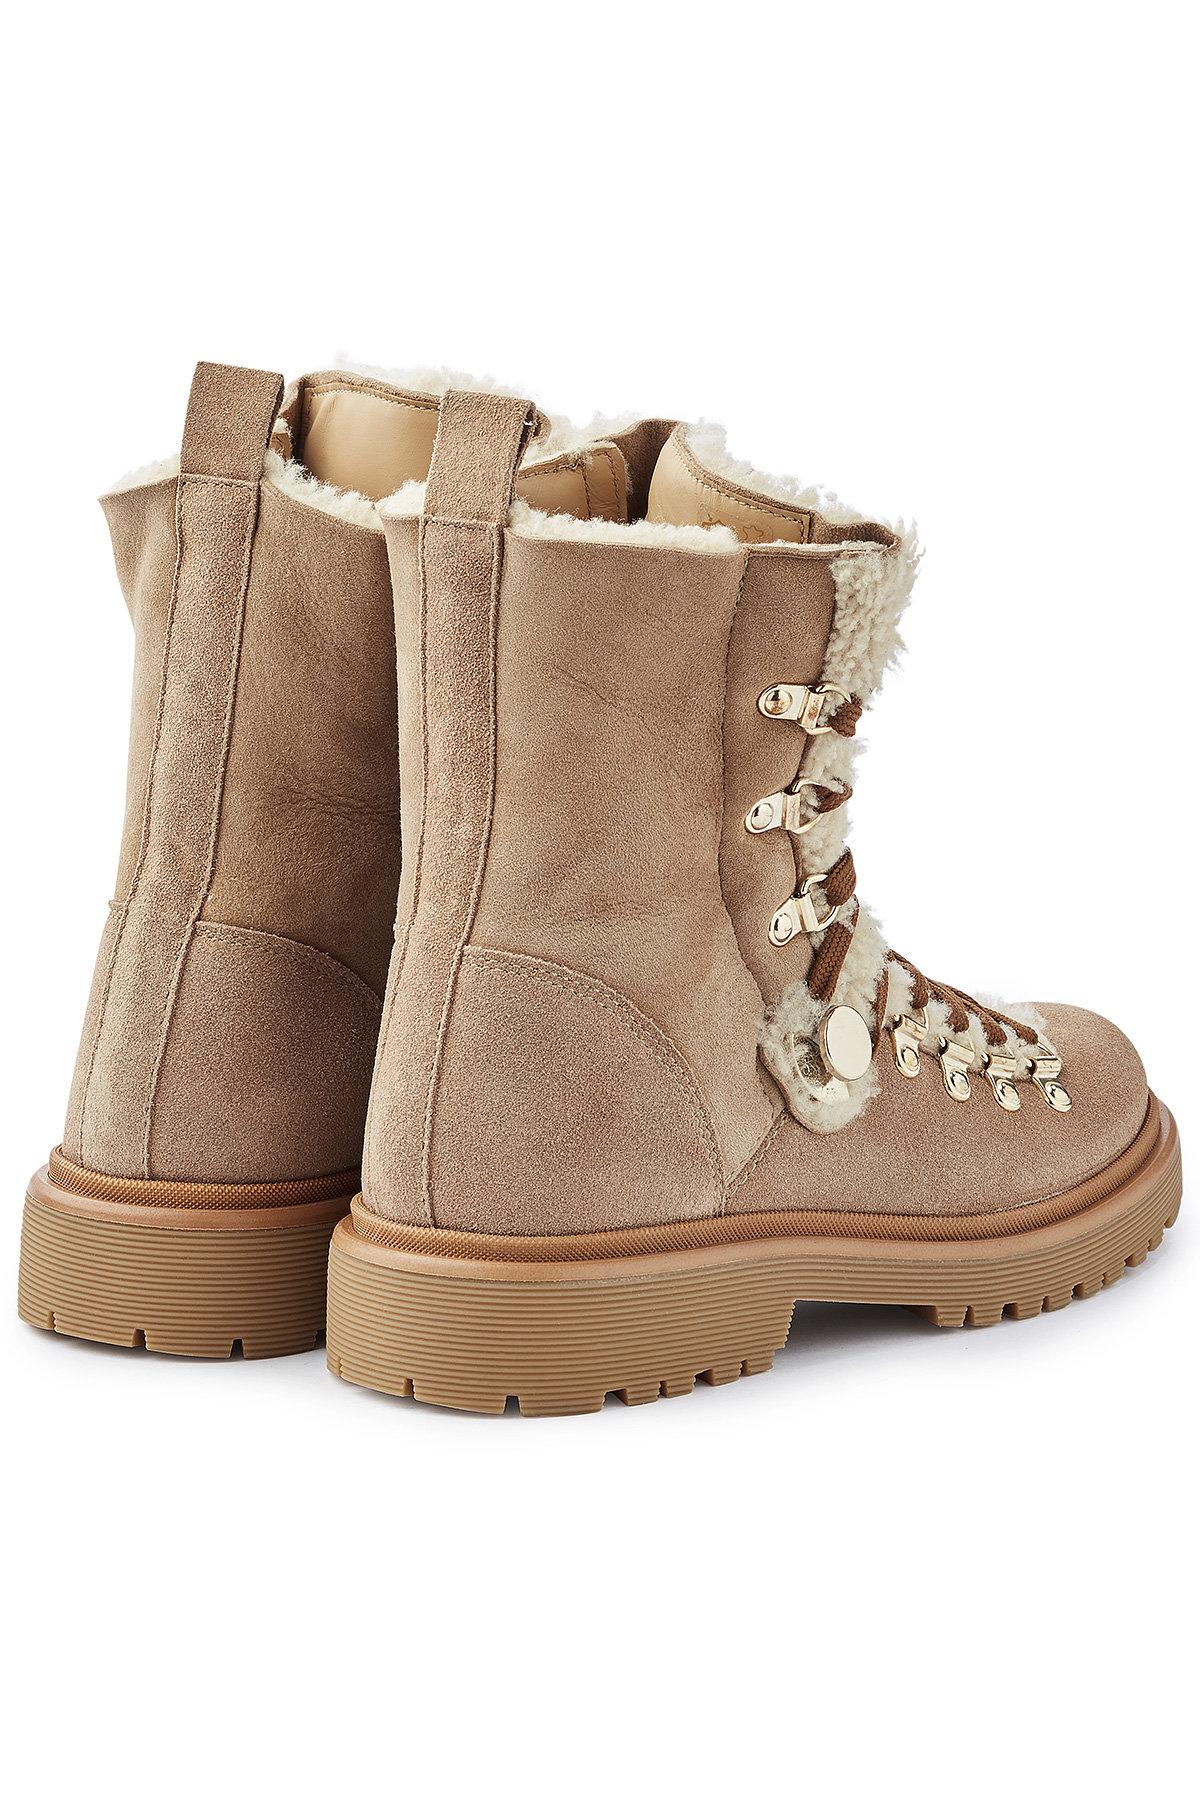 Moncler Berenice Suede Ankle Boots With Shearling in Brown - Lyst